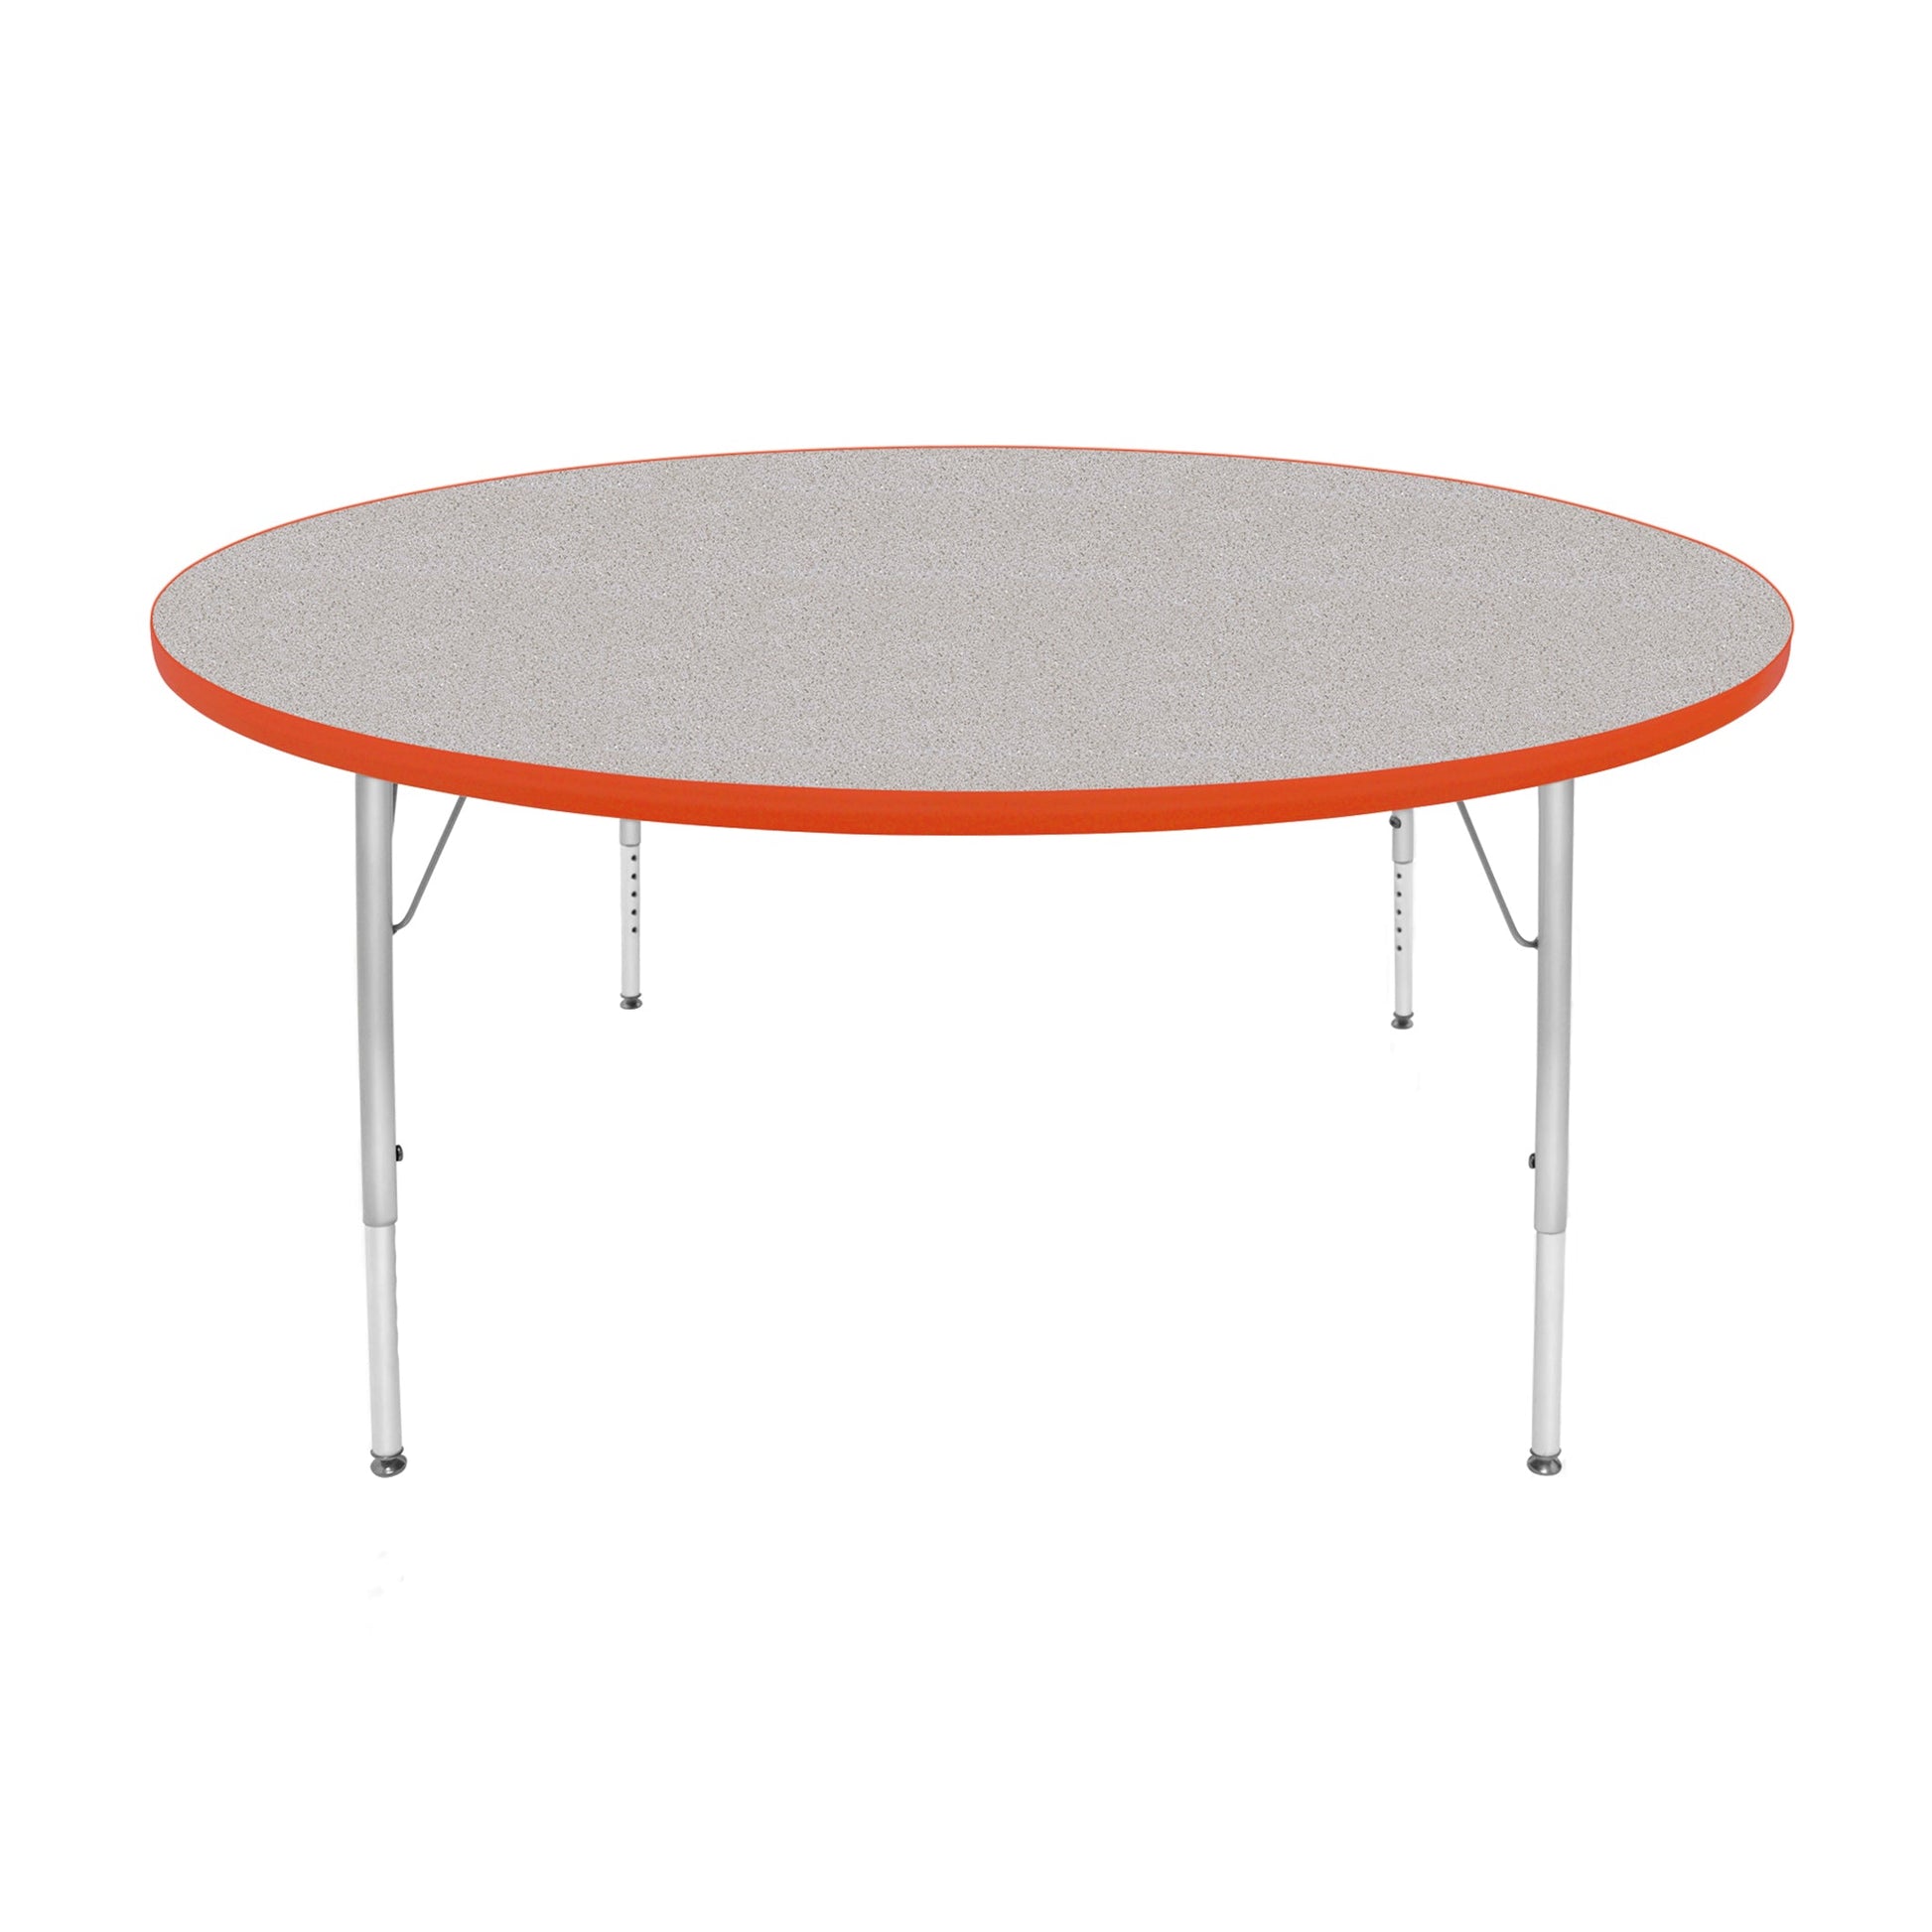 Mahar Creative Colors Large Round Creative Colors Activity Table with Heavy Duty Laminate Top (60" Diameter x 21-30"H) - SchoolOutlet